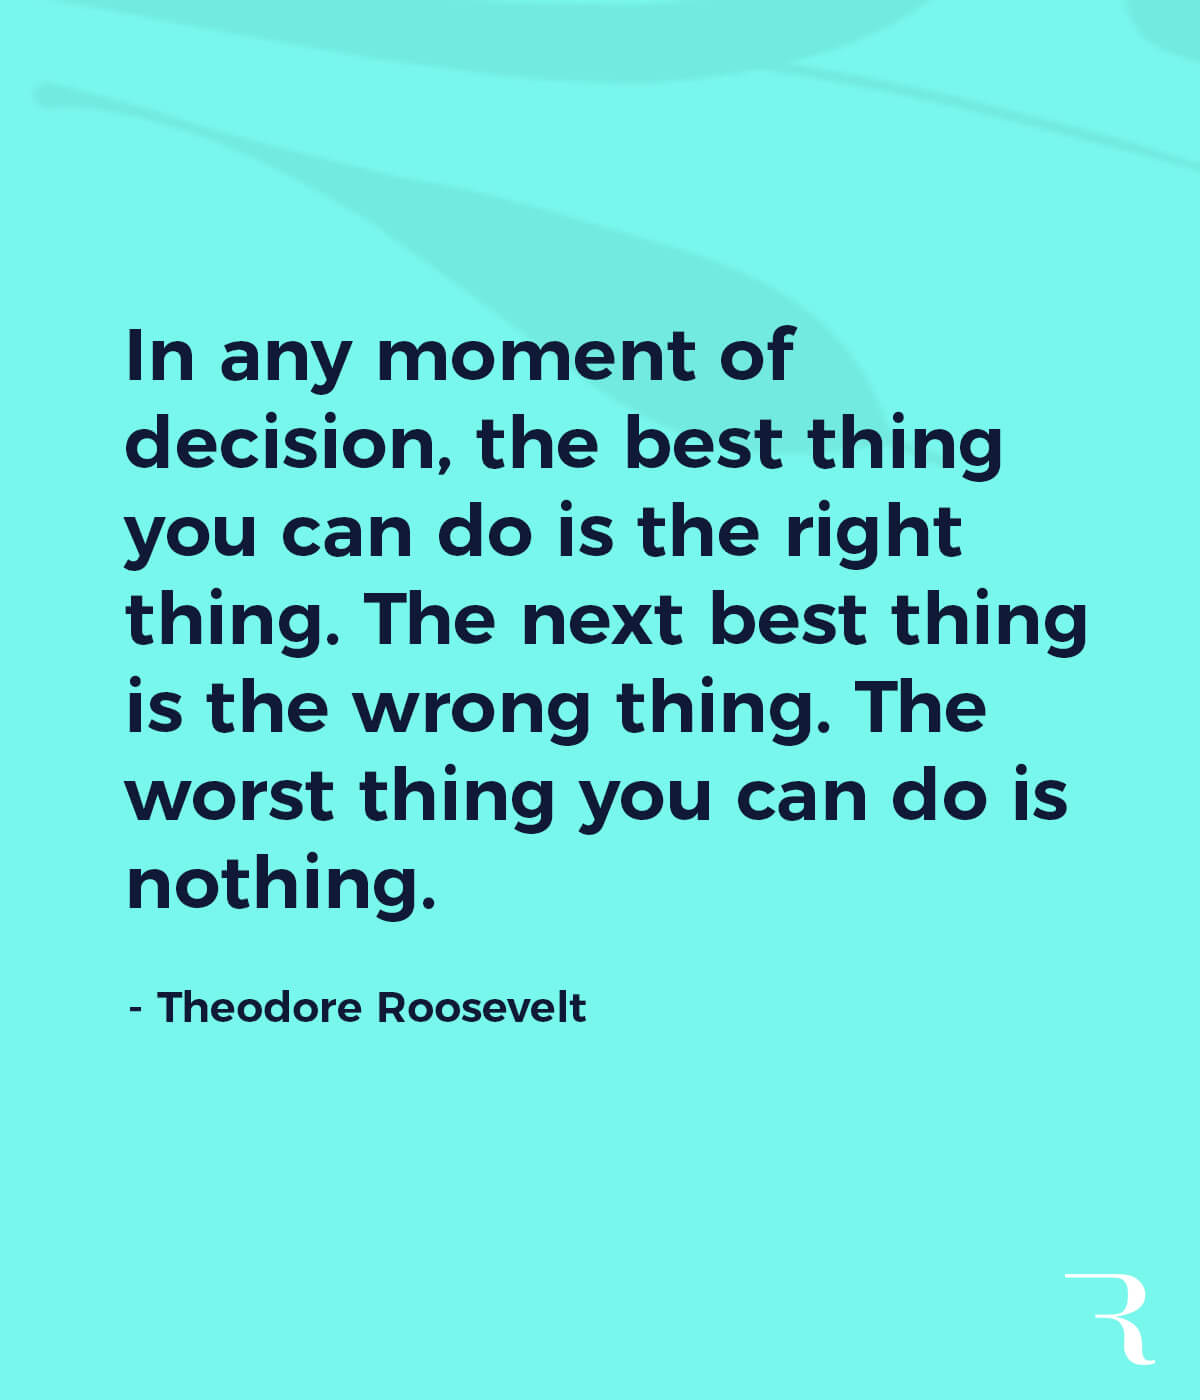 Motivational Quotes: “The best thing you can do is the right thing. The next best is the wrong thing. The worst is nothing.” 112 Motivational Quotes to Be a Better Entrepreneur